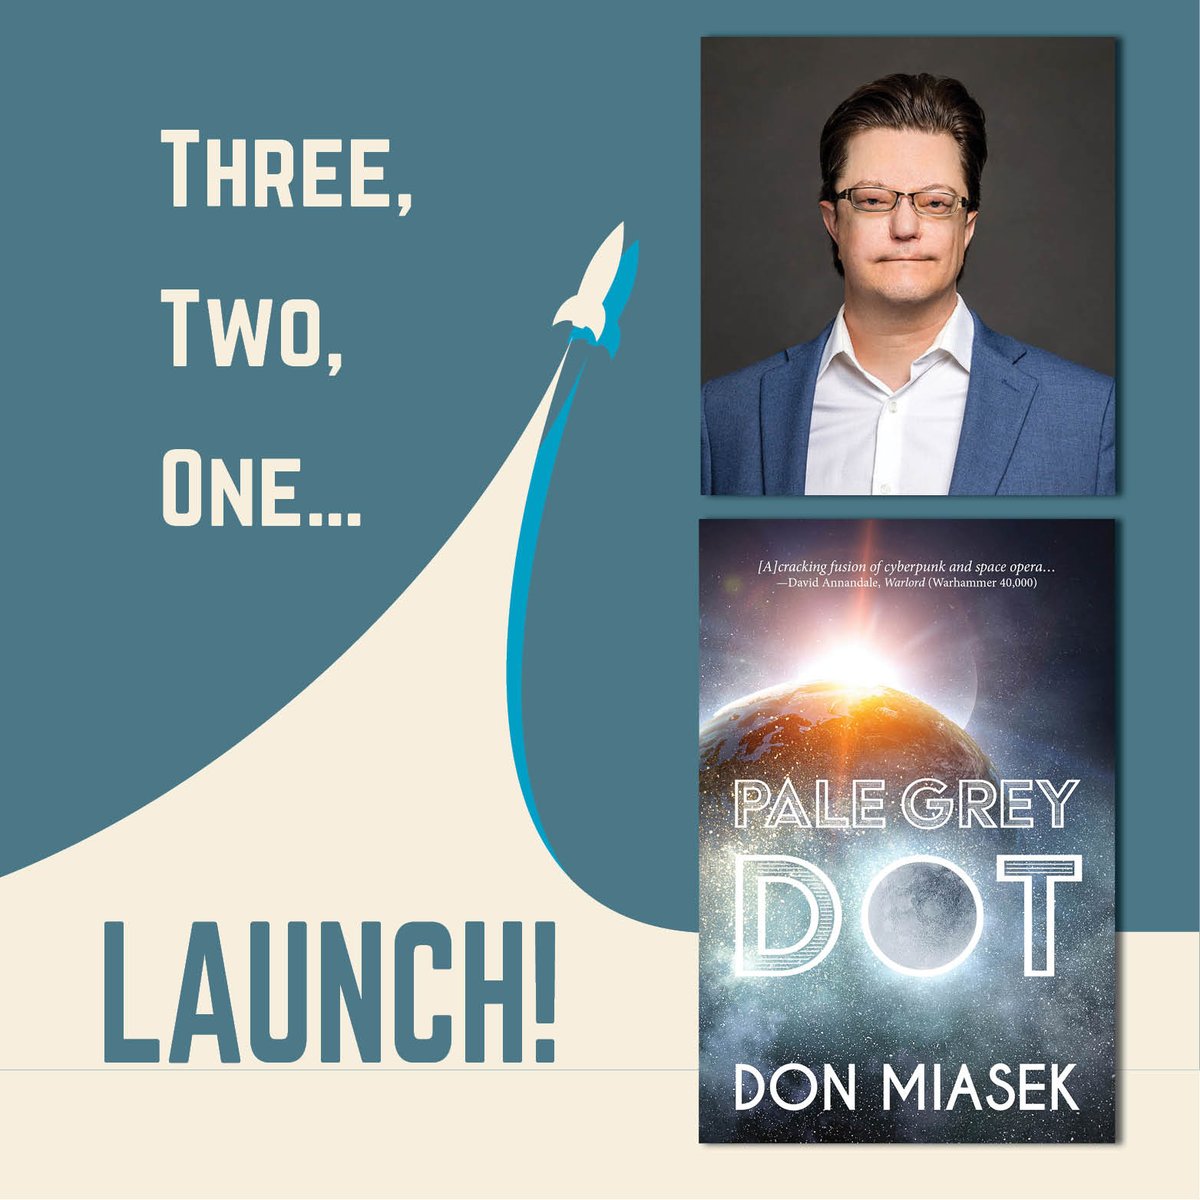 While you wait for @DonMiasek's PALE GREY DOT's wide release on Wednesday, May 15, might we suggest popping by our website to check out Don's 3-2-1 Launch interview?

turnstonepress.com/bird-on-a-wire………   

#ComingSoon #SciFi #DebutFiction #SpaceOpera #AuthorsofInstagram #CanadianSciFi